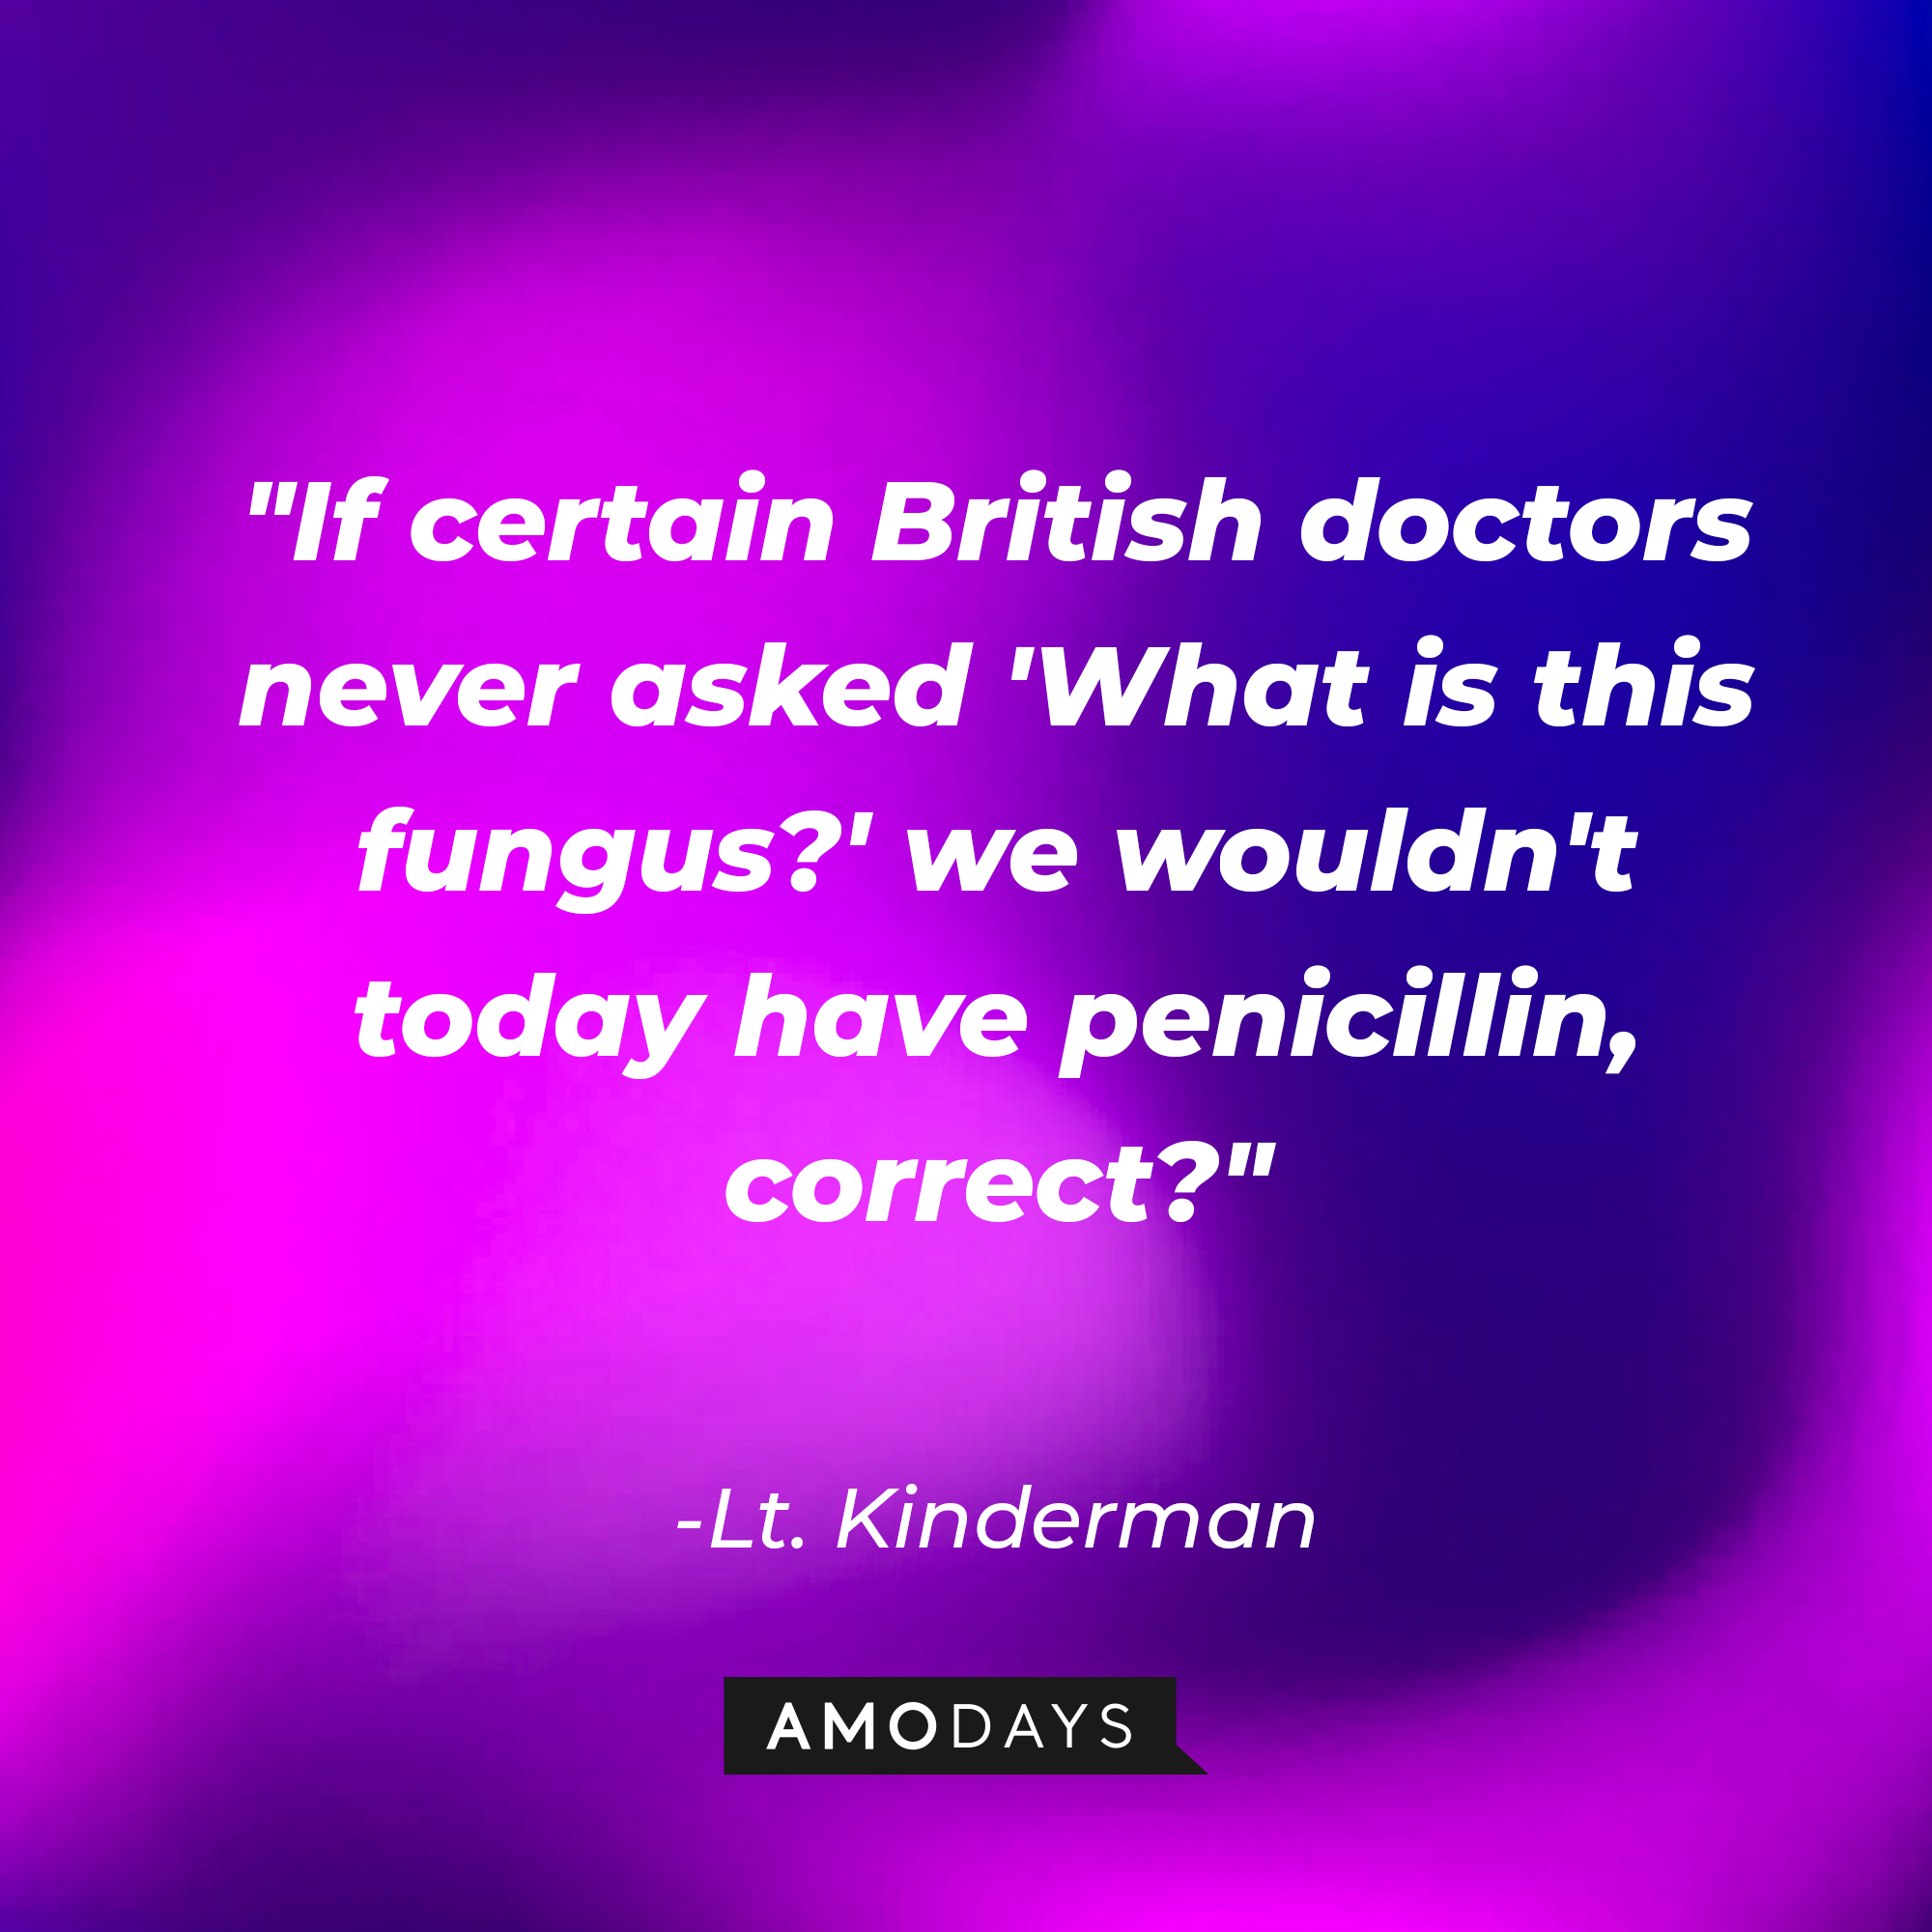 Lt. Kinderman's quote: "If certain British doctors never asked 'What is this fungus?' we wouldn't today have penicillin, correct?" | Source: AmoDAys